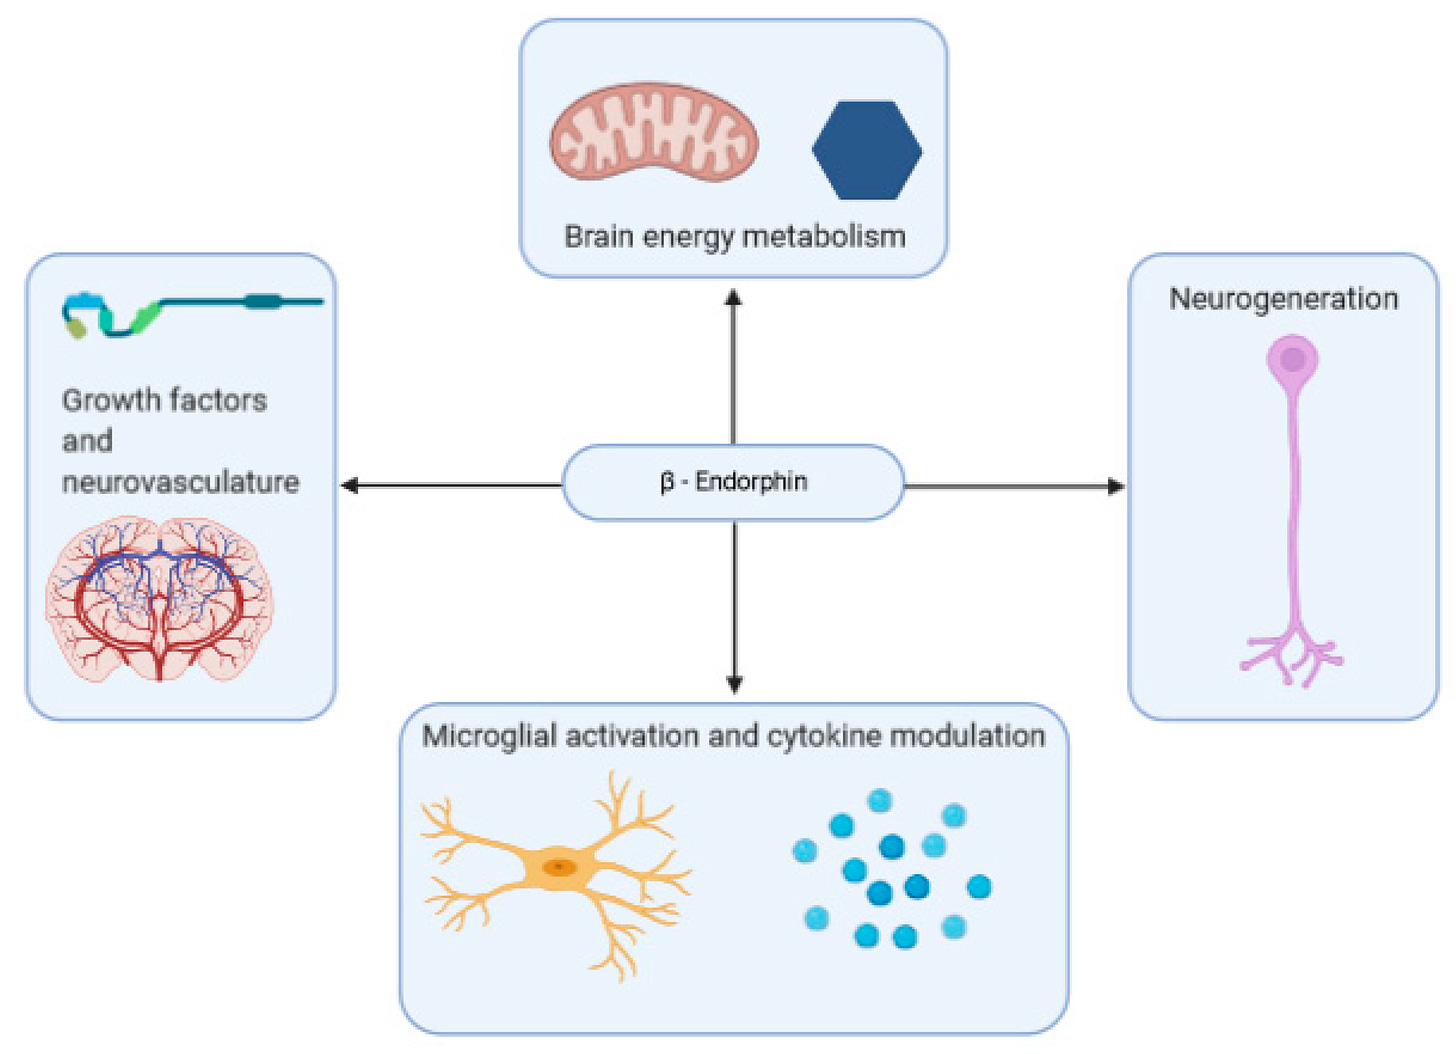 IJMS | Free Full-Text | Roles of β-Endorphin in Stress, Behavior,  Neuroinflammation, and Brain Energy Metabolism